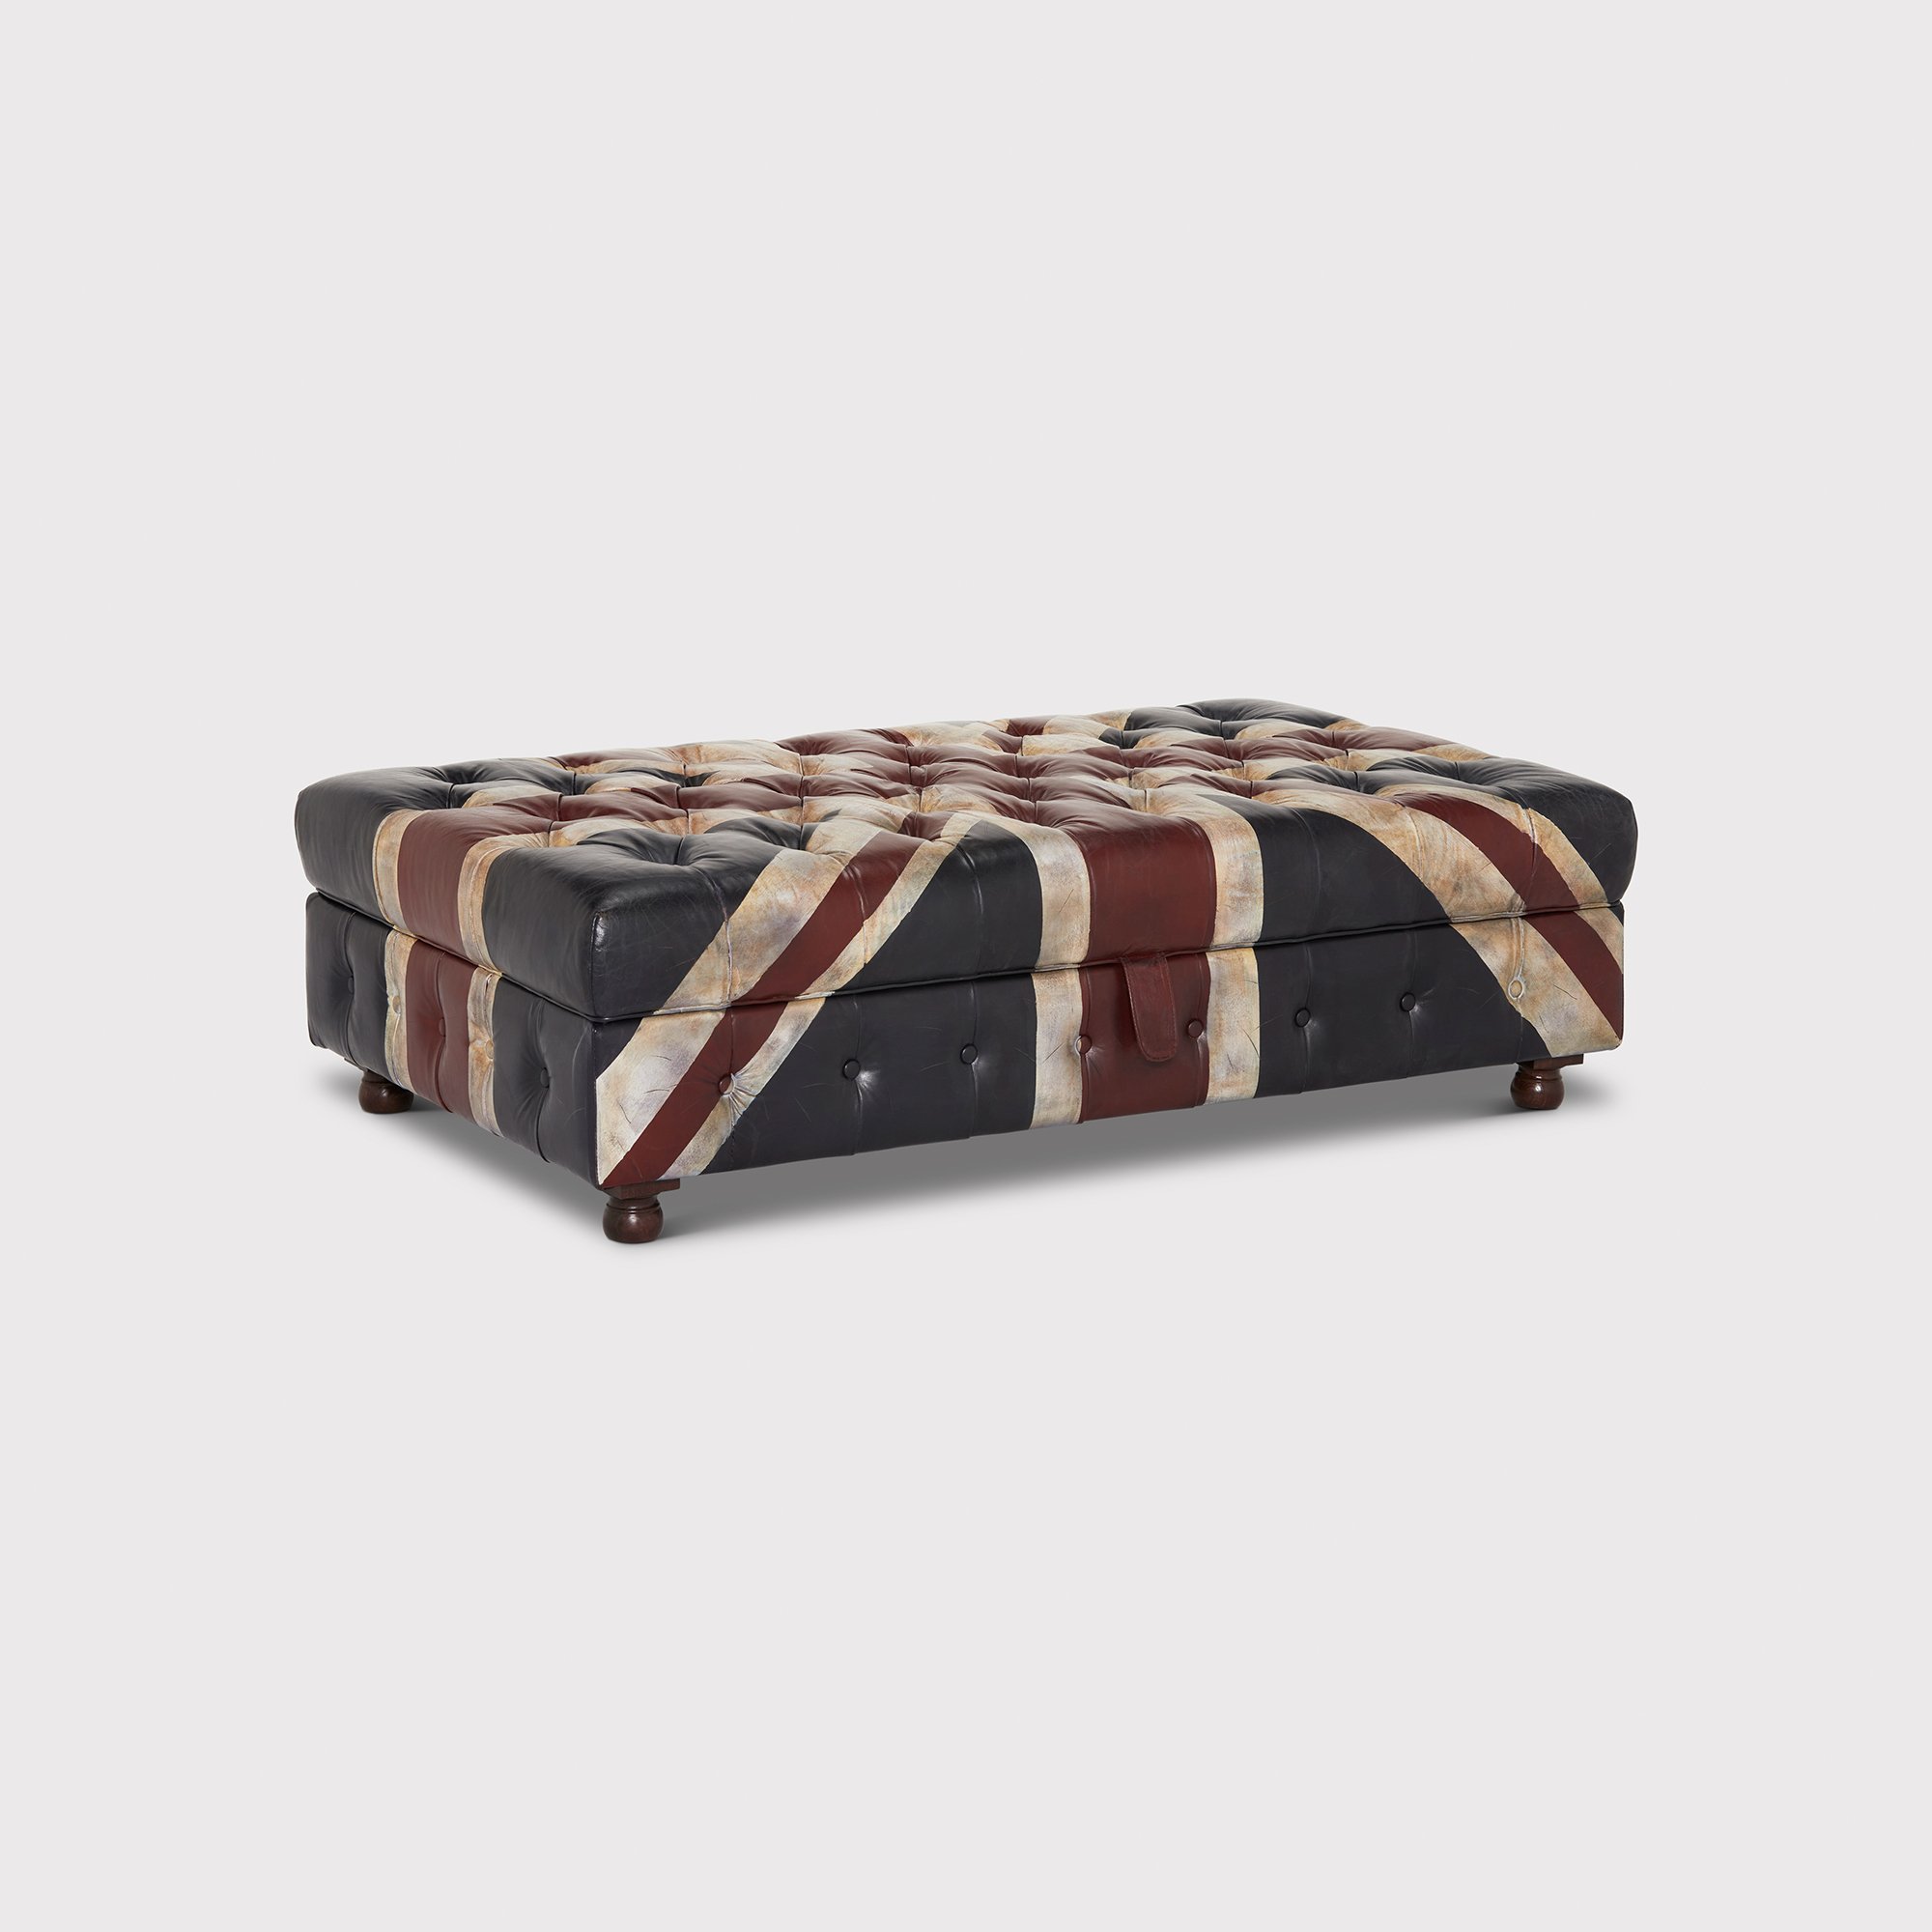 Timothy Oulton Westminster Button Large Storage Footstool, Square, Black Leather | Barker & Stonehouse